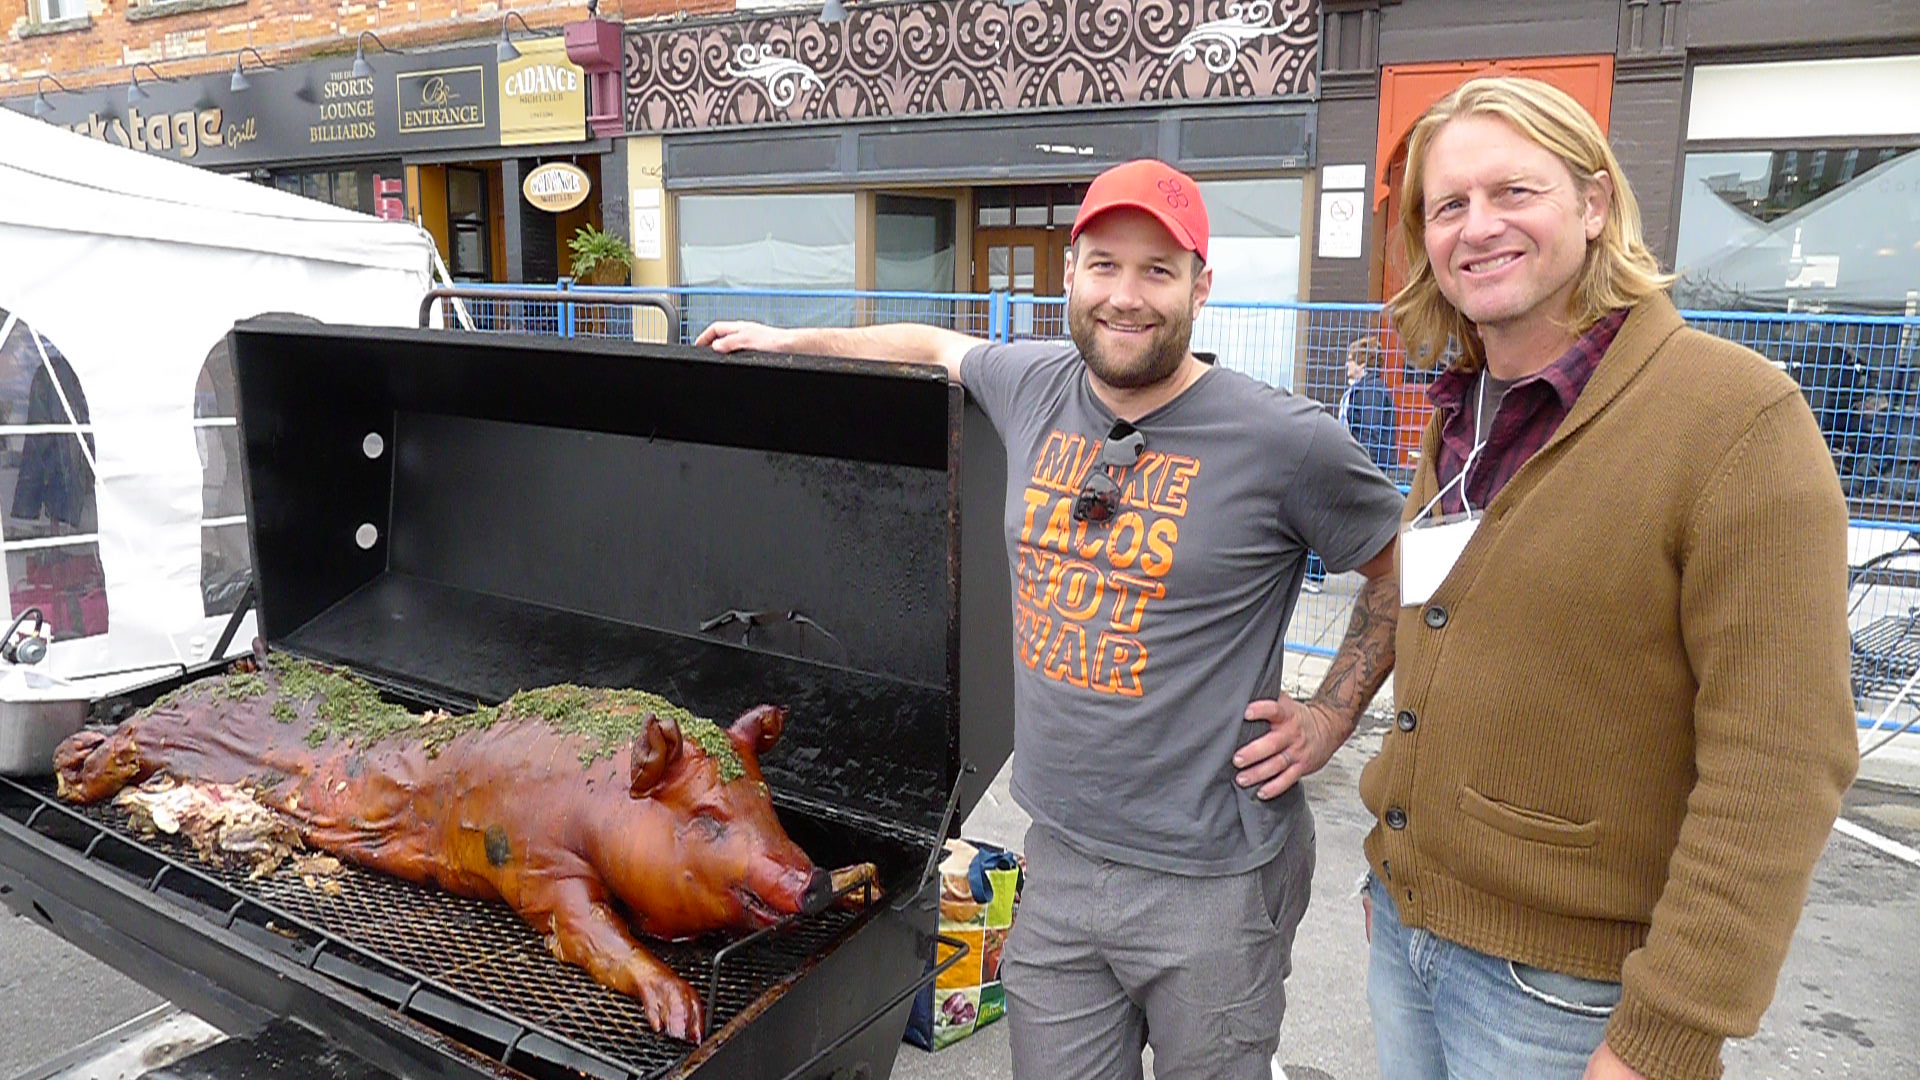 Chef Nick Benninger and Farmer Mark Lass proudly show off their very special pig roast.